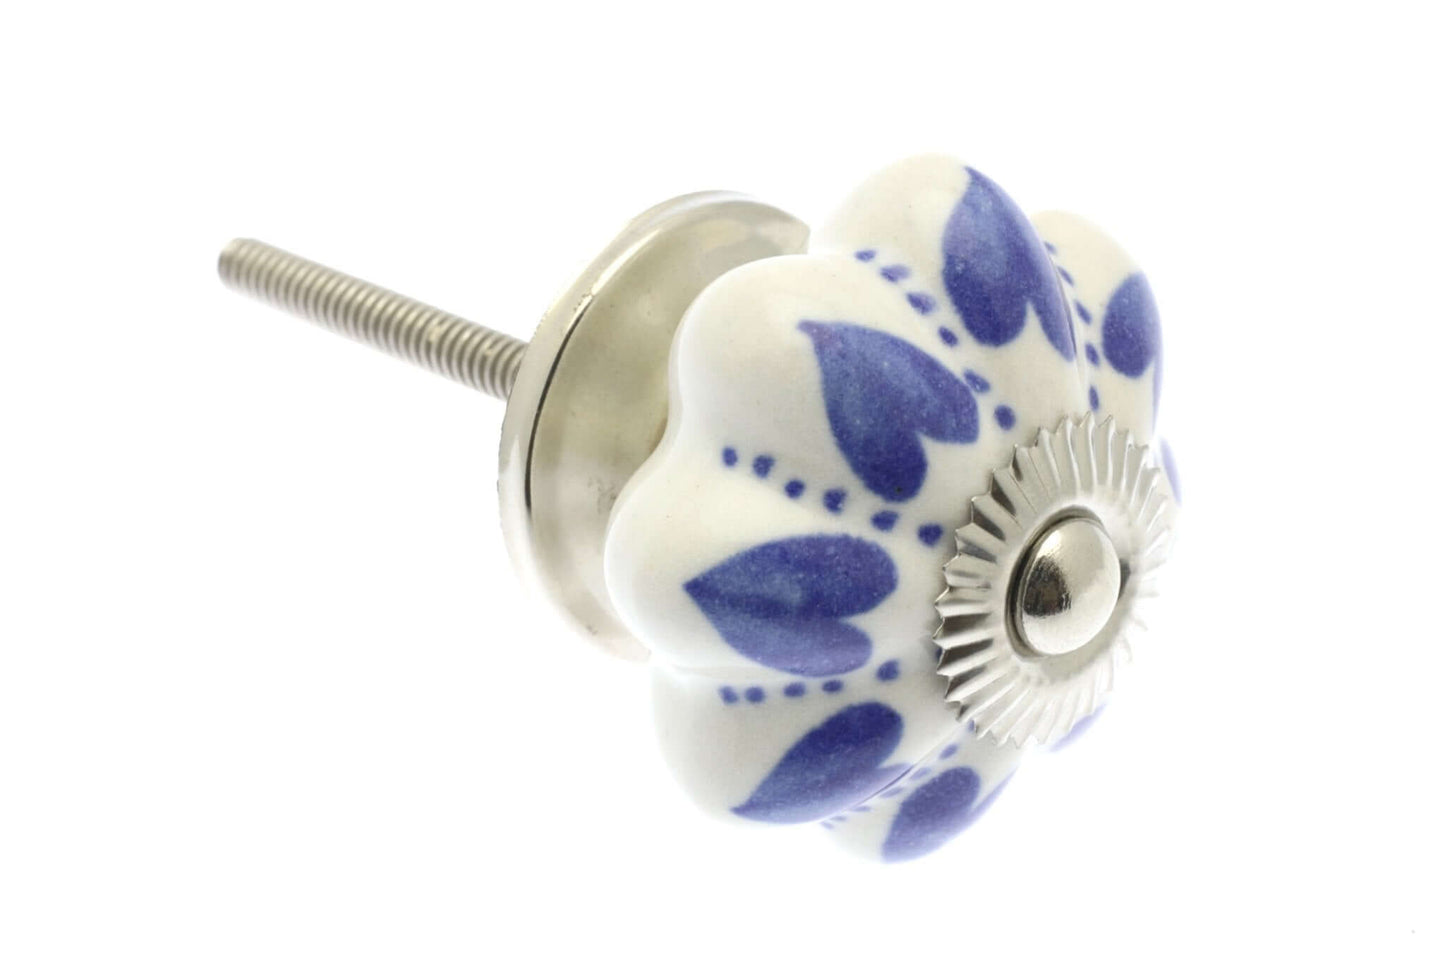 Ceramic Cupboard Knobs - Blue Hearts And Dots On White 42mm Fan Shaped Ceramic Cupboard Knob - Chrome Base & Fixings (EF-03-BEW)